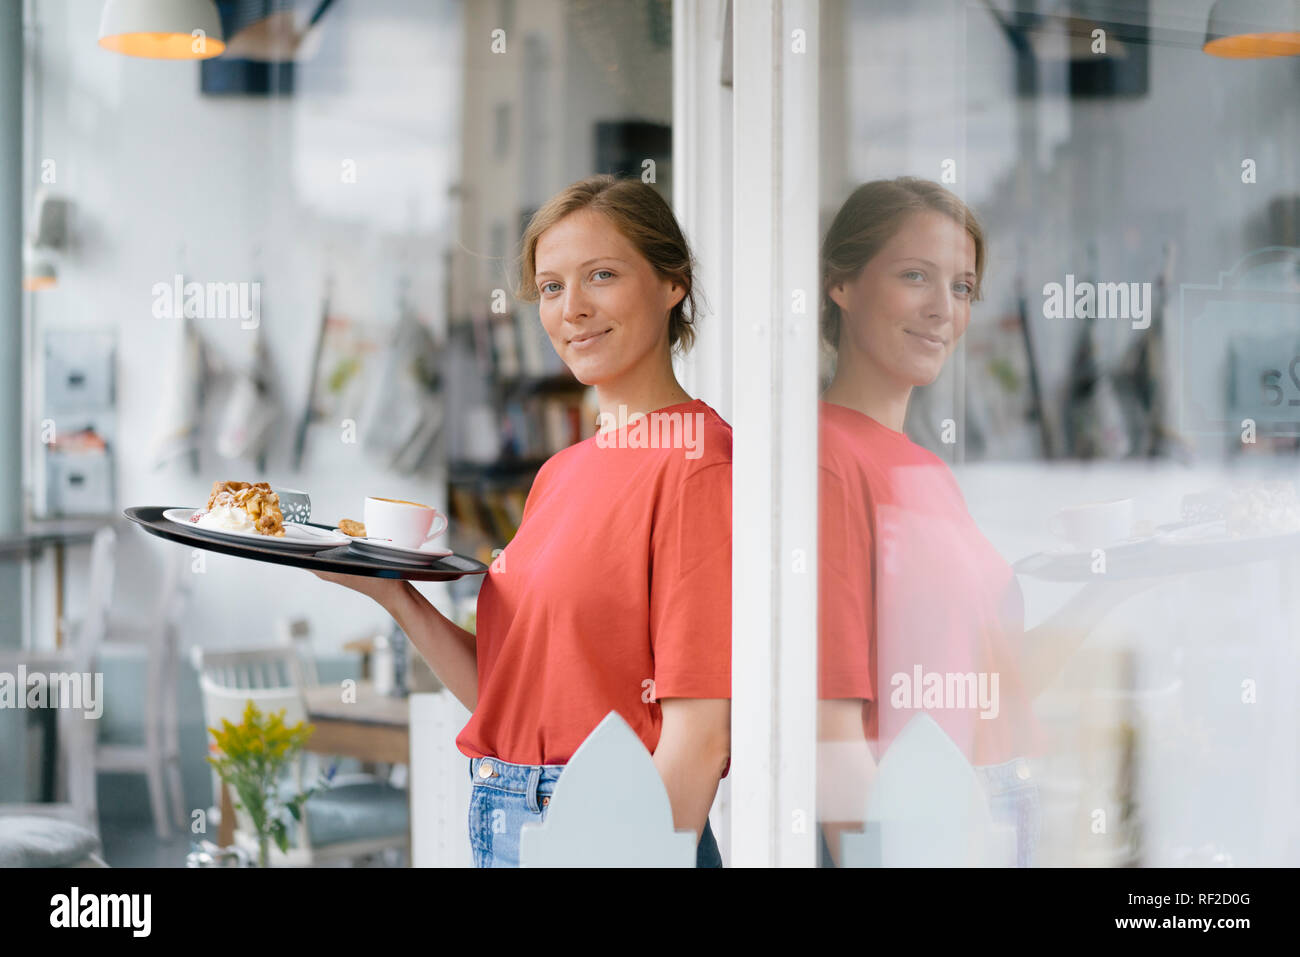 Portrait of smiling young woman serving coffee and cake in a cafe Stock Photo